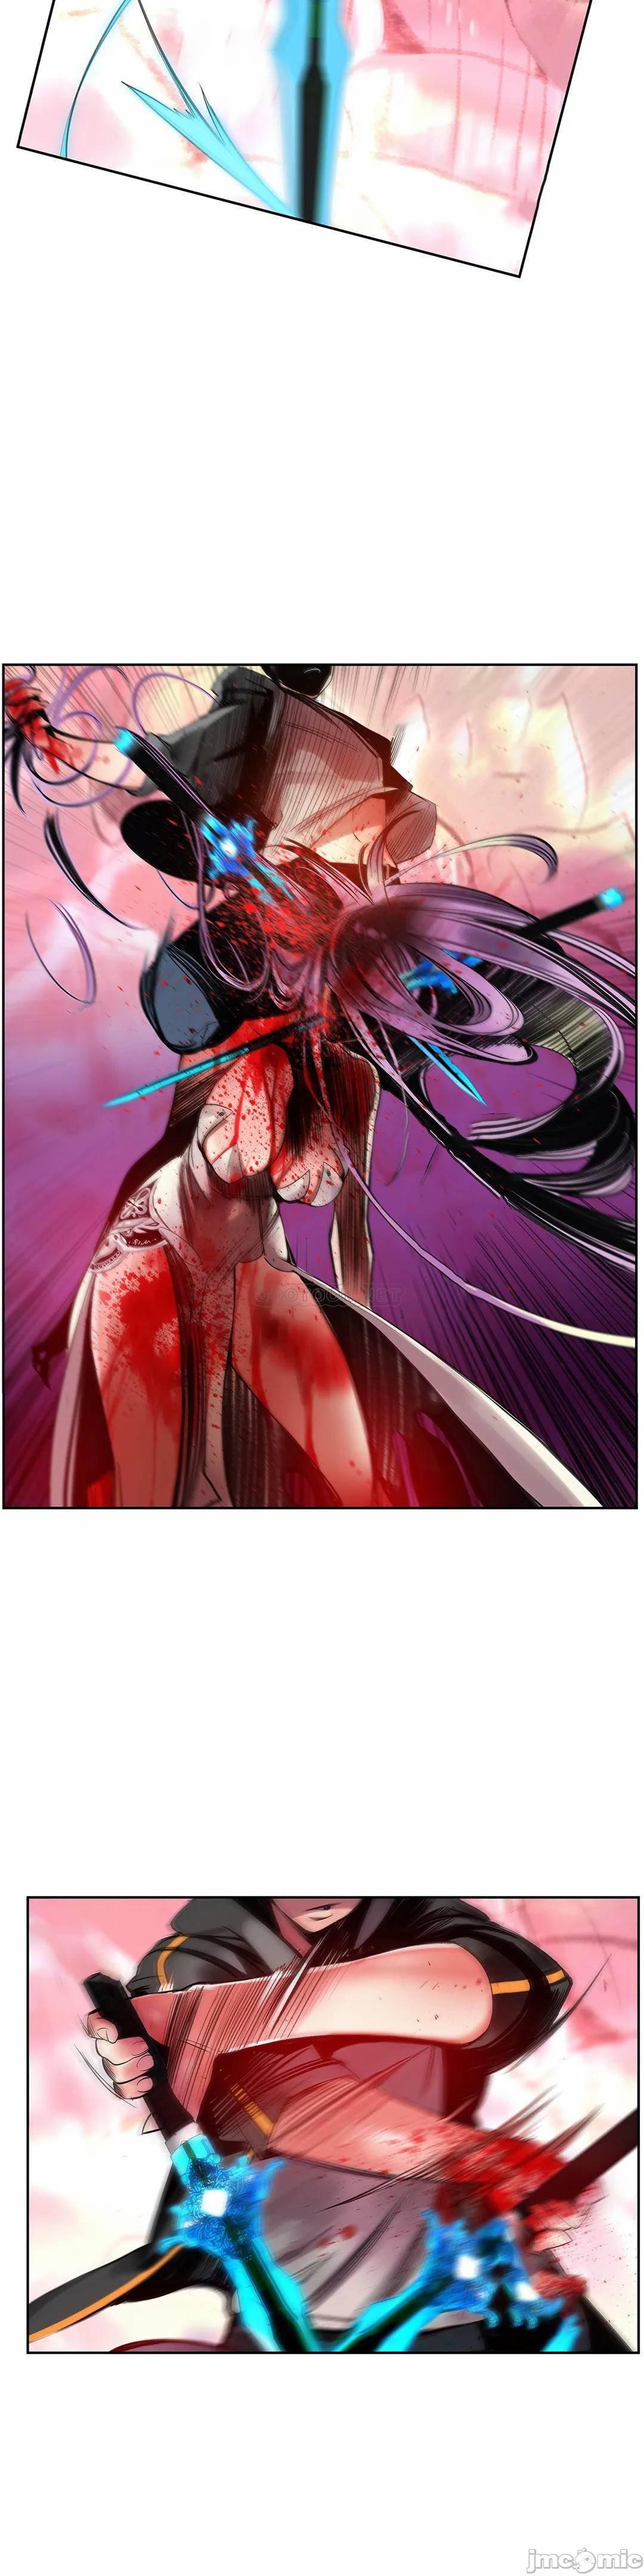 [Juder] Lilith`s Cord (第二季) Ch.77-93 end [Chinese] 310